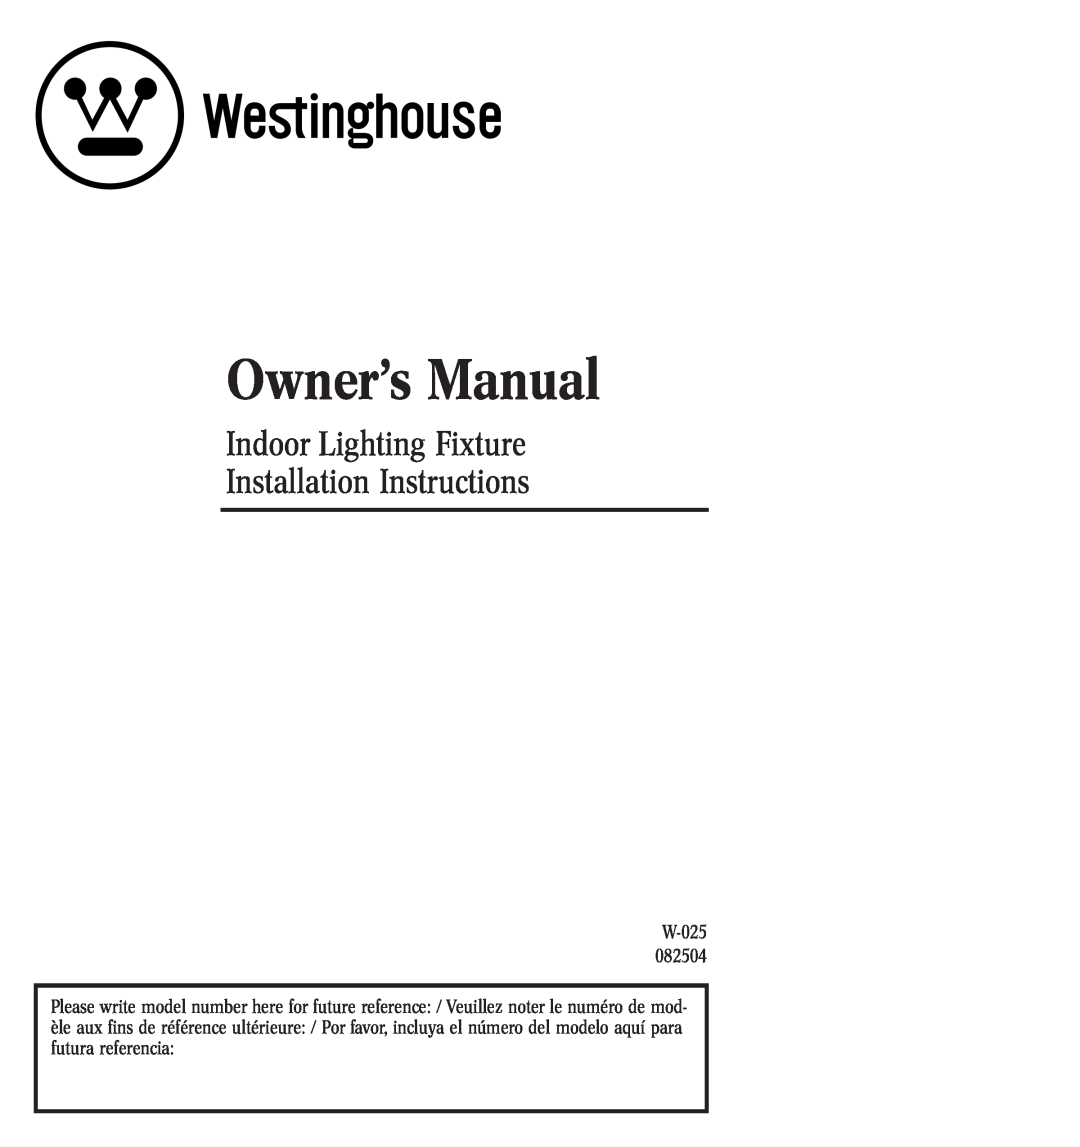 Westinghouse 082504, w-025 owner manual Indoor Lighting Fixture Installation Instructions 